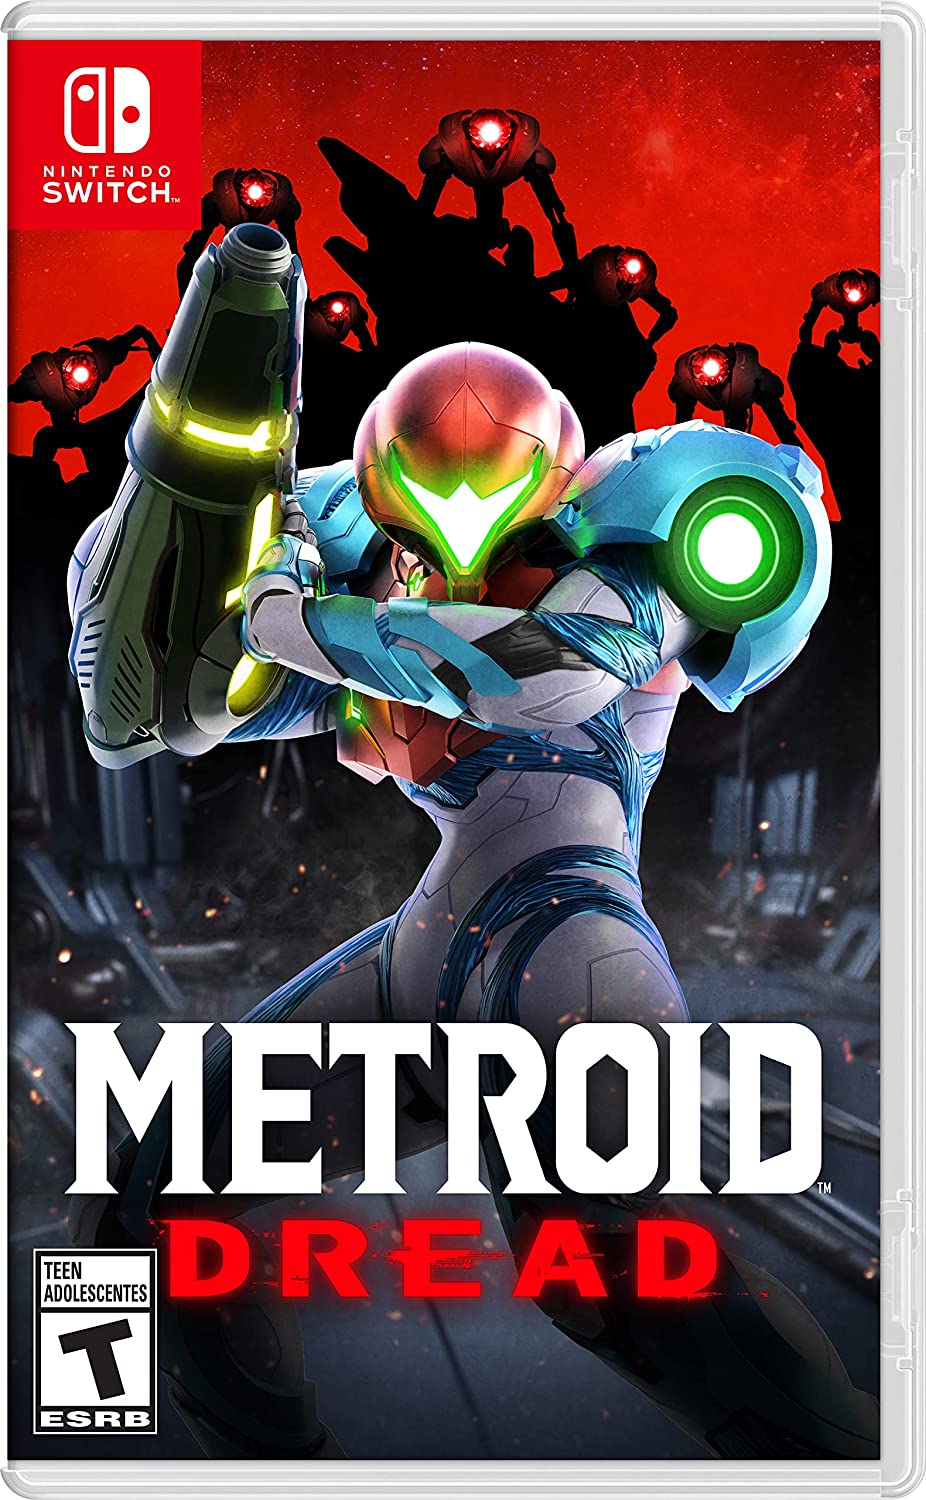 Metroid Dread cover artwork for Nintendo Switch.